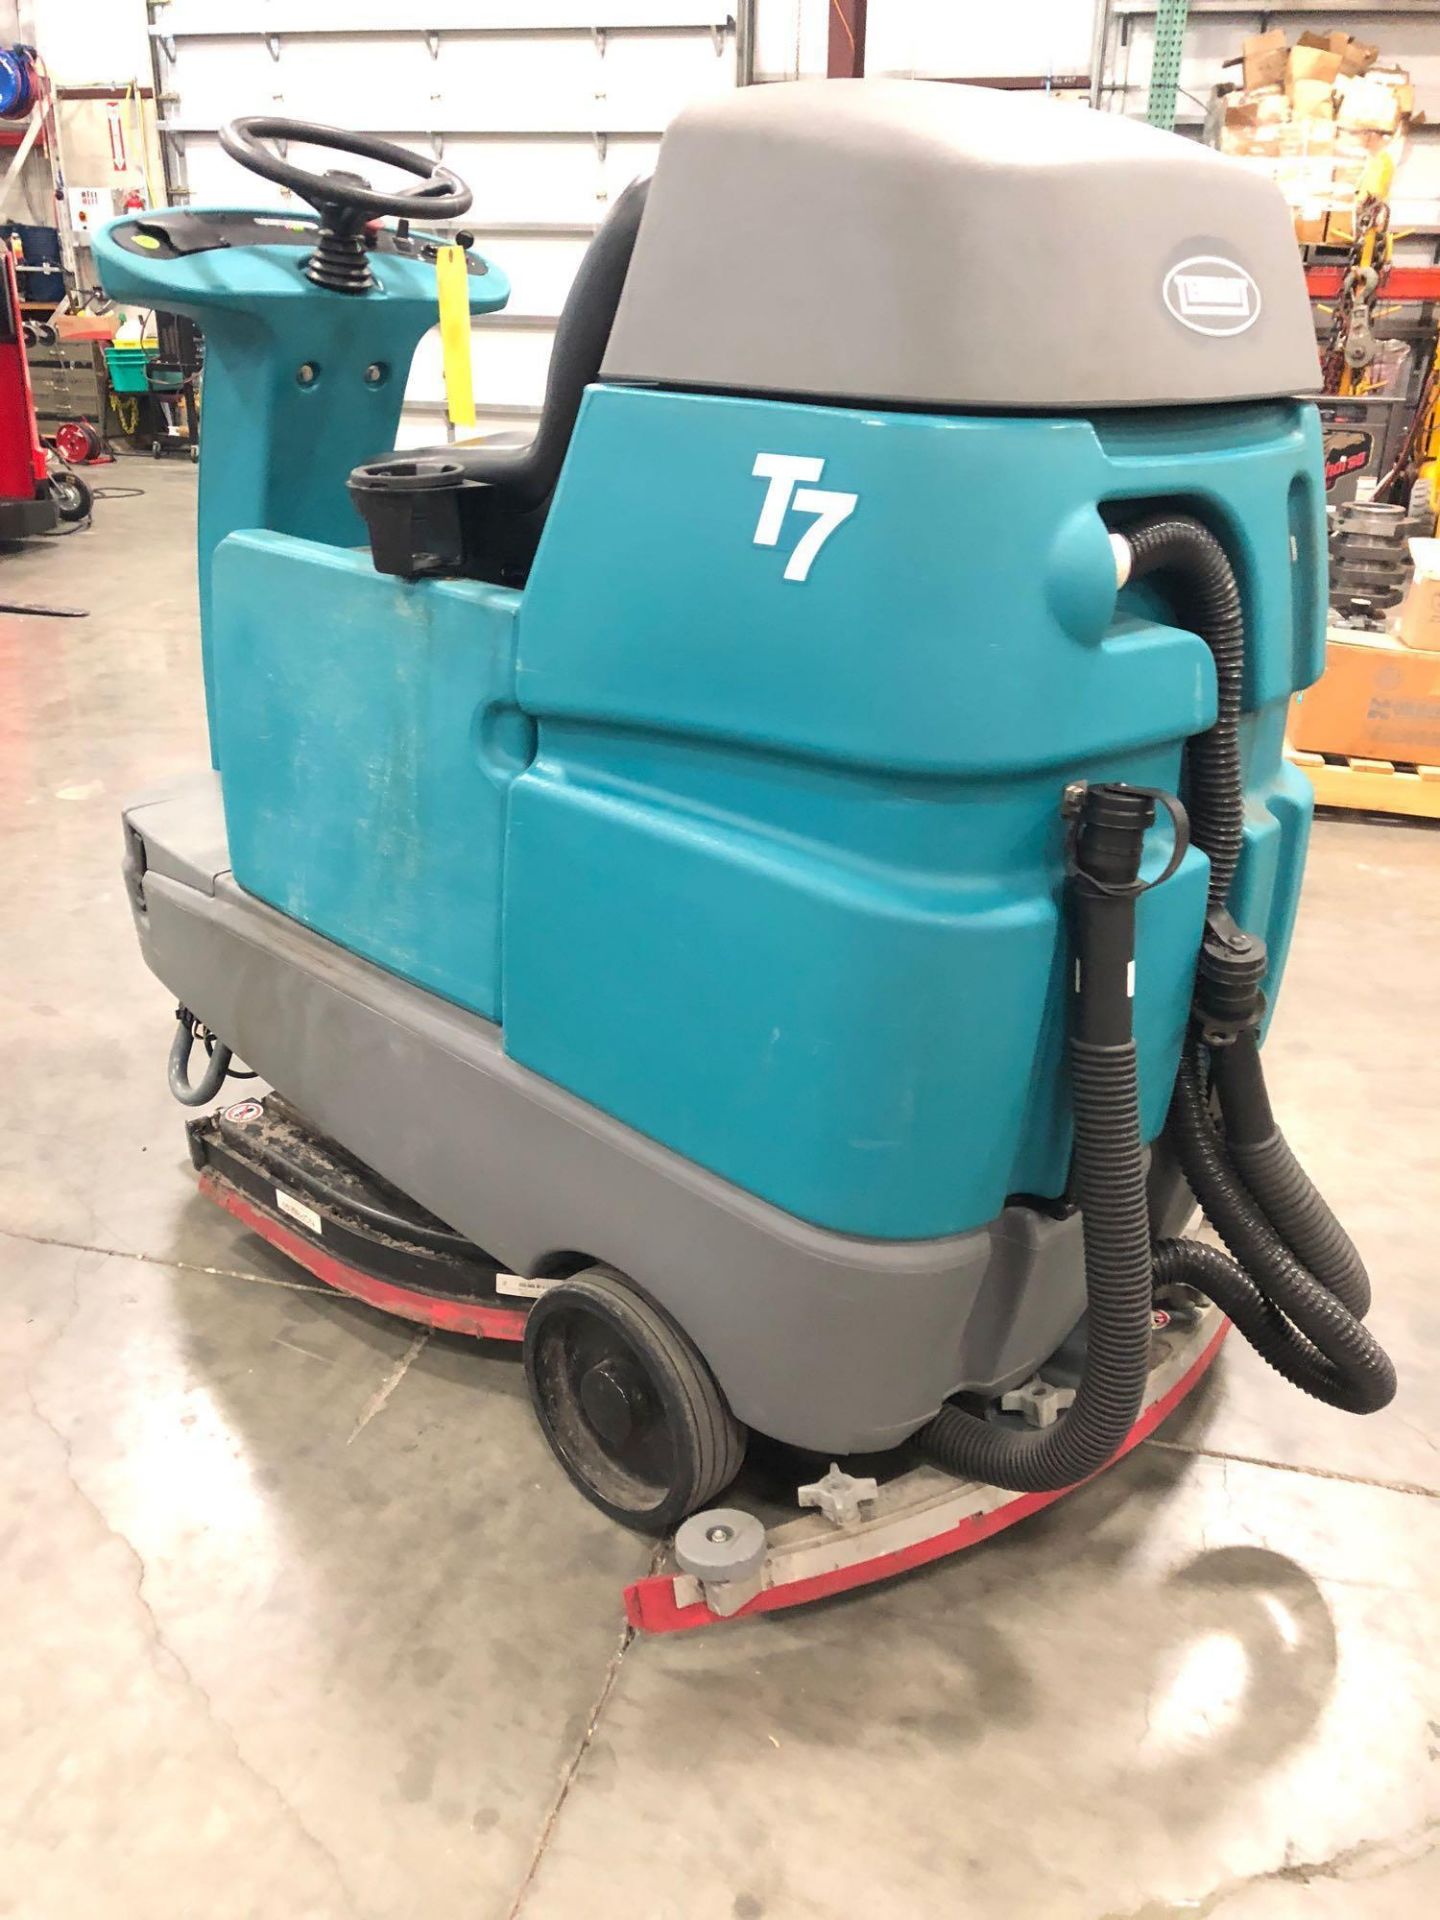 2015 TENNANT T7 ELECTRIC FLOOR SCRUBBER, BUILT IN BATTERY CHARGER, 872 HOURS SHOWING, RUNS - Image 4 of 9